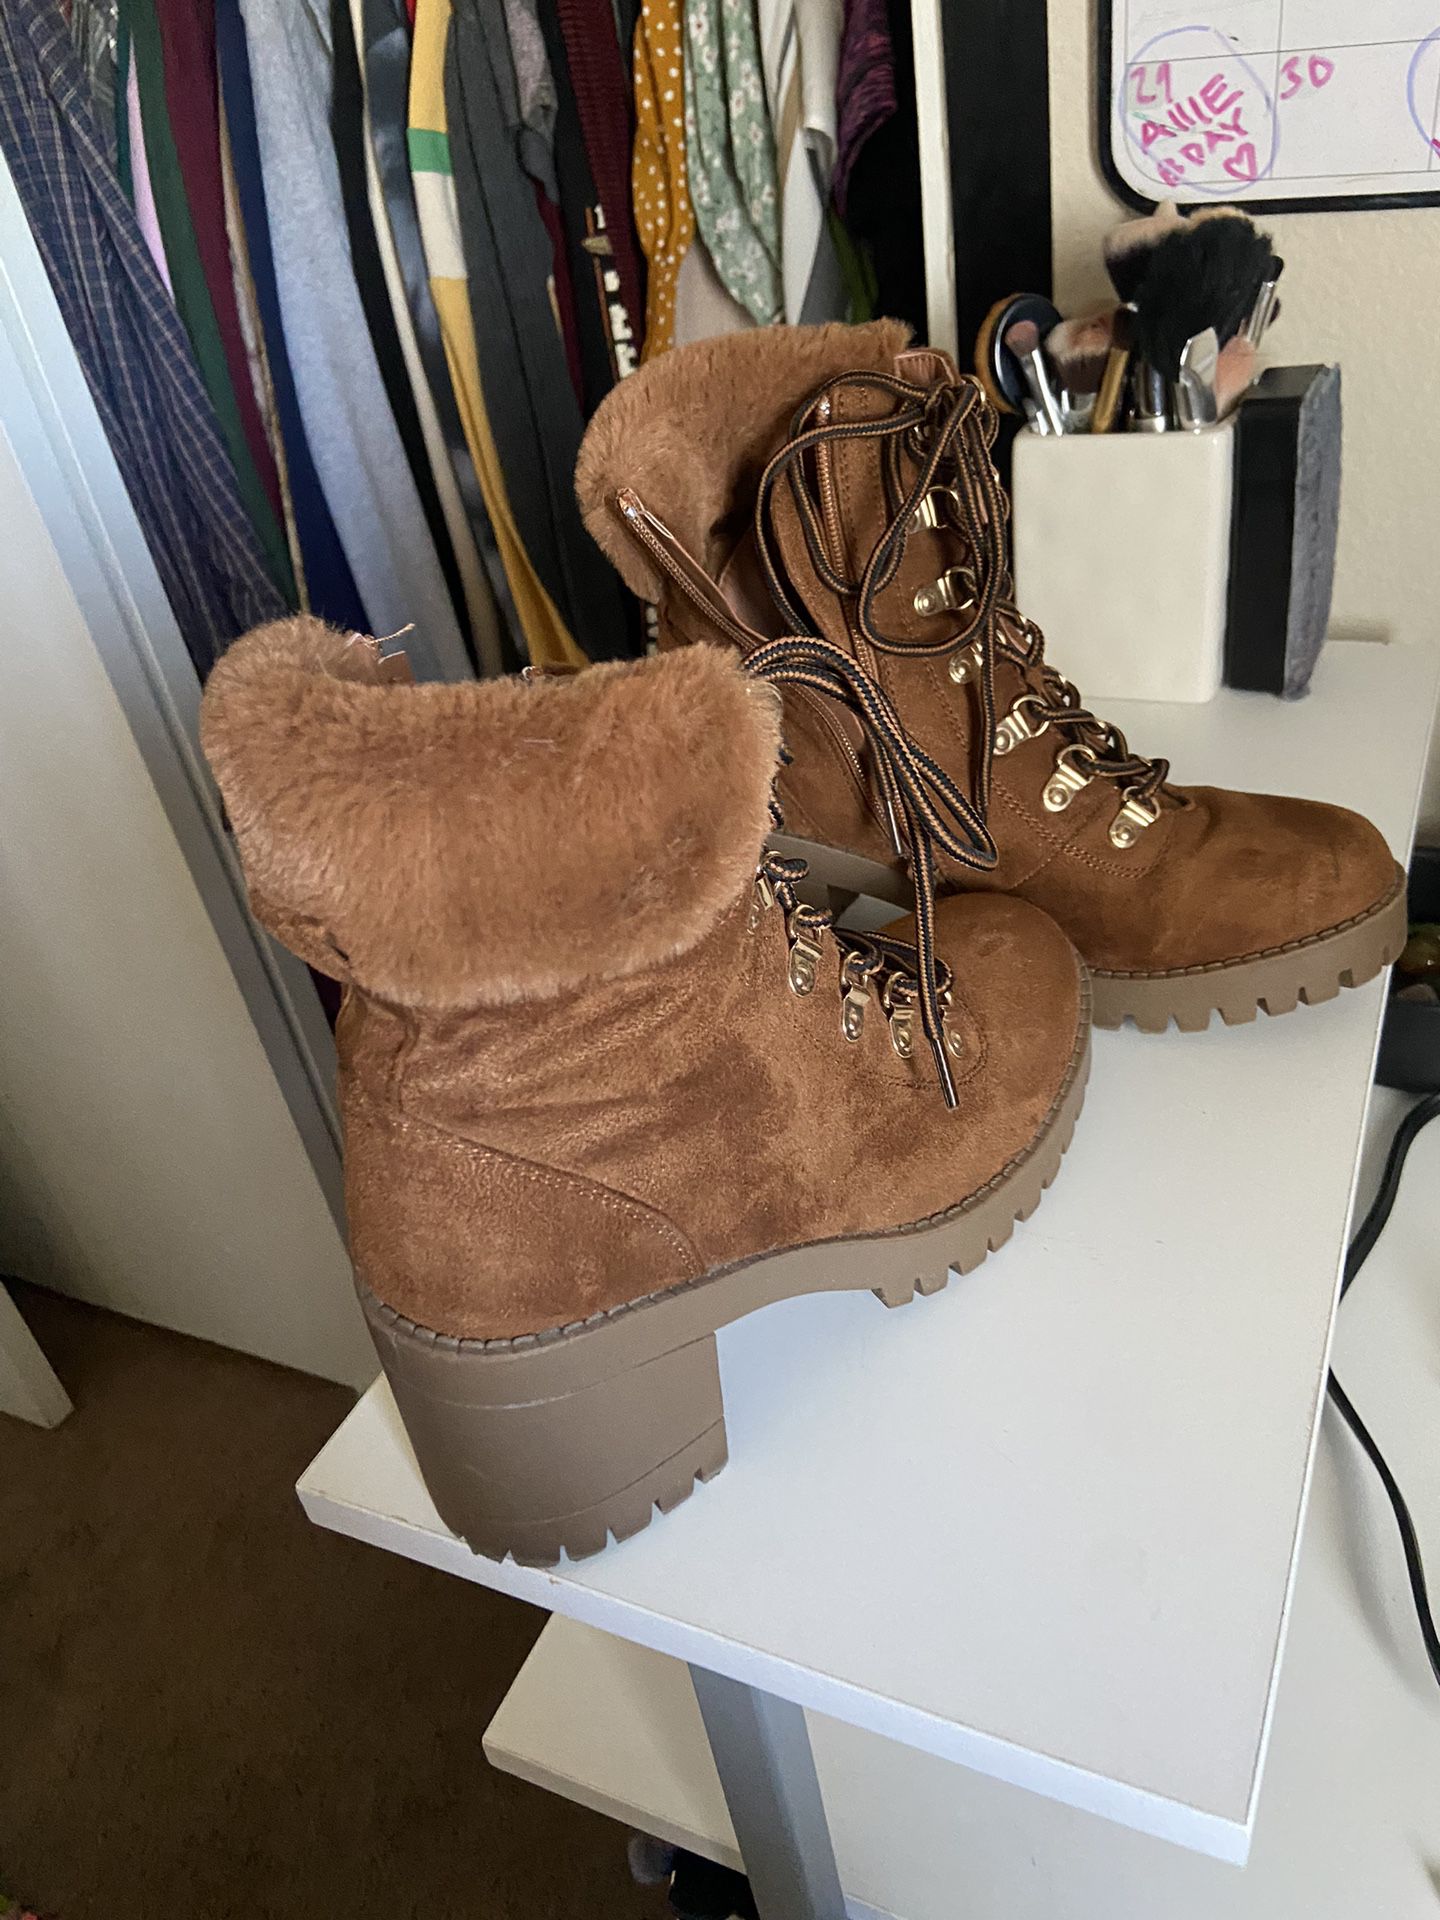 Lv Boots Women Size 8 for Sale in Fontana, CA - OfferUp